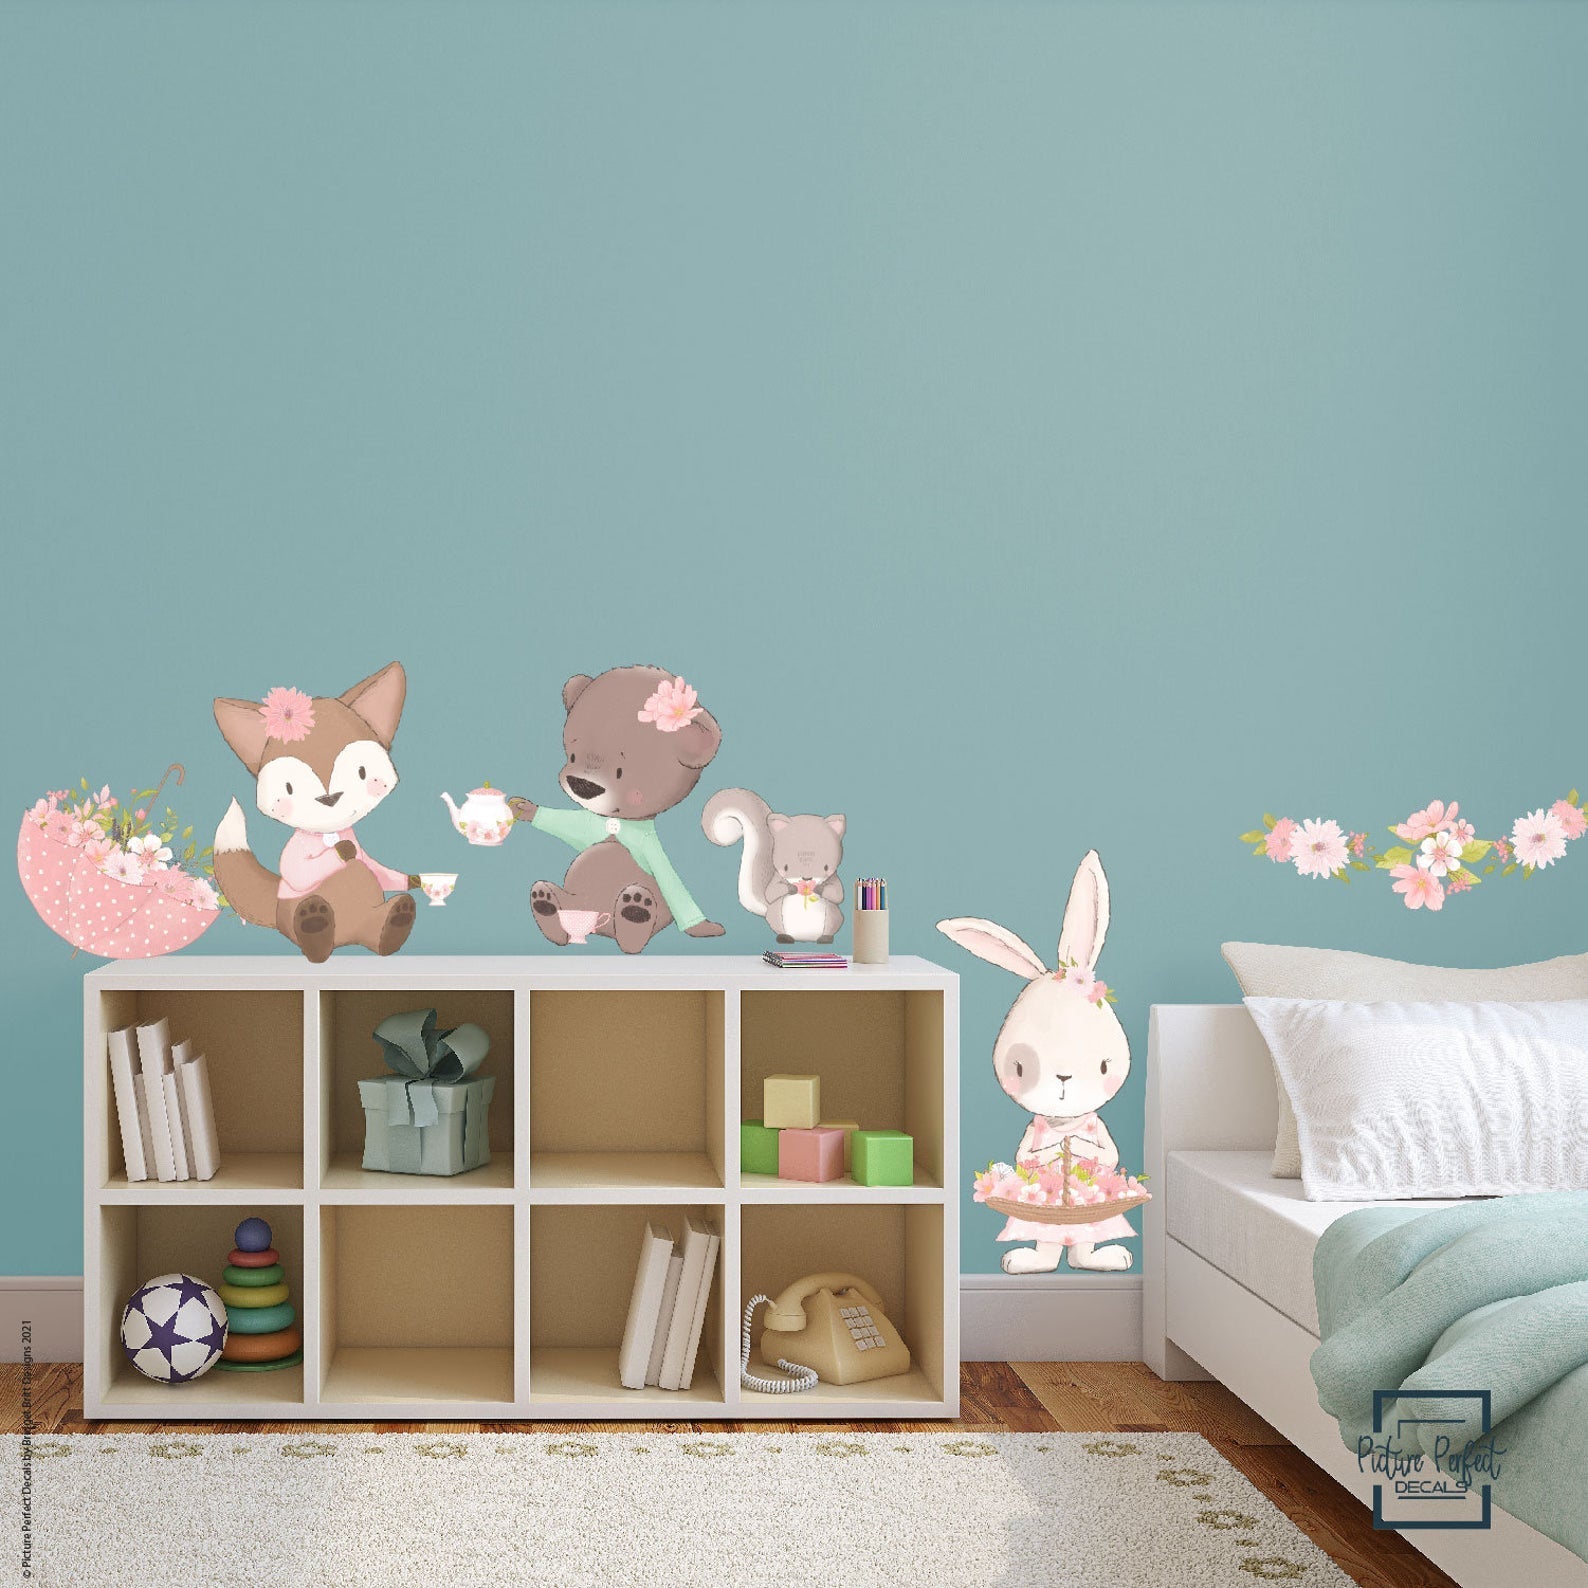 Tea Party with Forest Animals Wall Decals Removable Wallpaper Stickers - Picture Perfect Decals